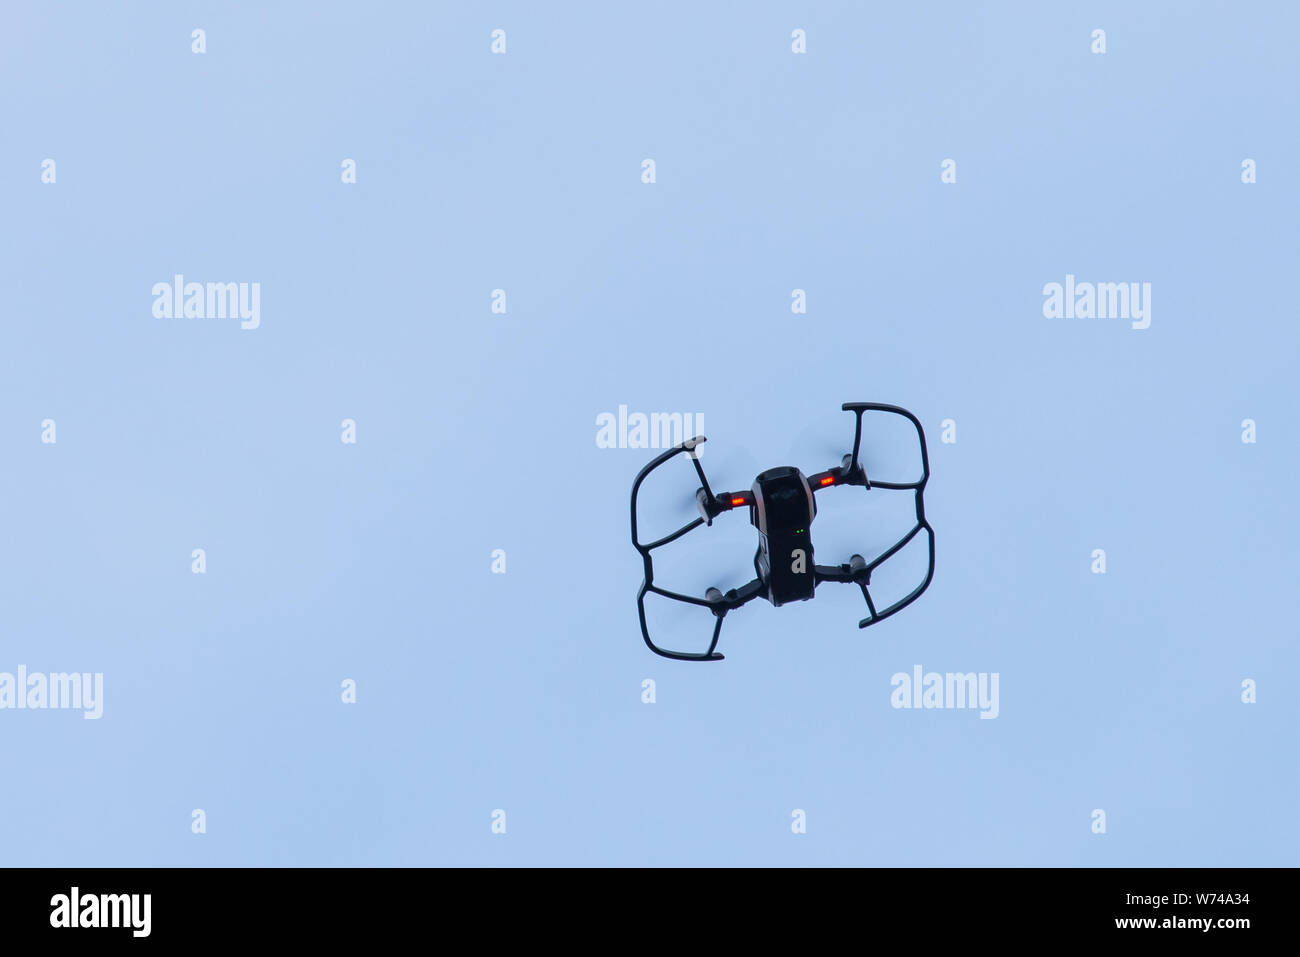 Russia, Rostovskaya oblast, September 16, 2018: DJI MAVIC AIR - Compact Drone by DJI with 12 MP 4K HDR camera, mounted on a 3-axis gimbal fly in sky. Stock Photo